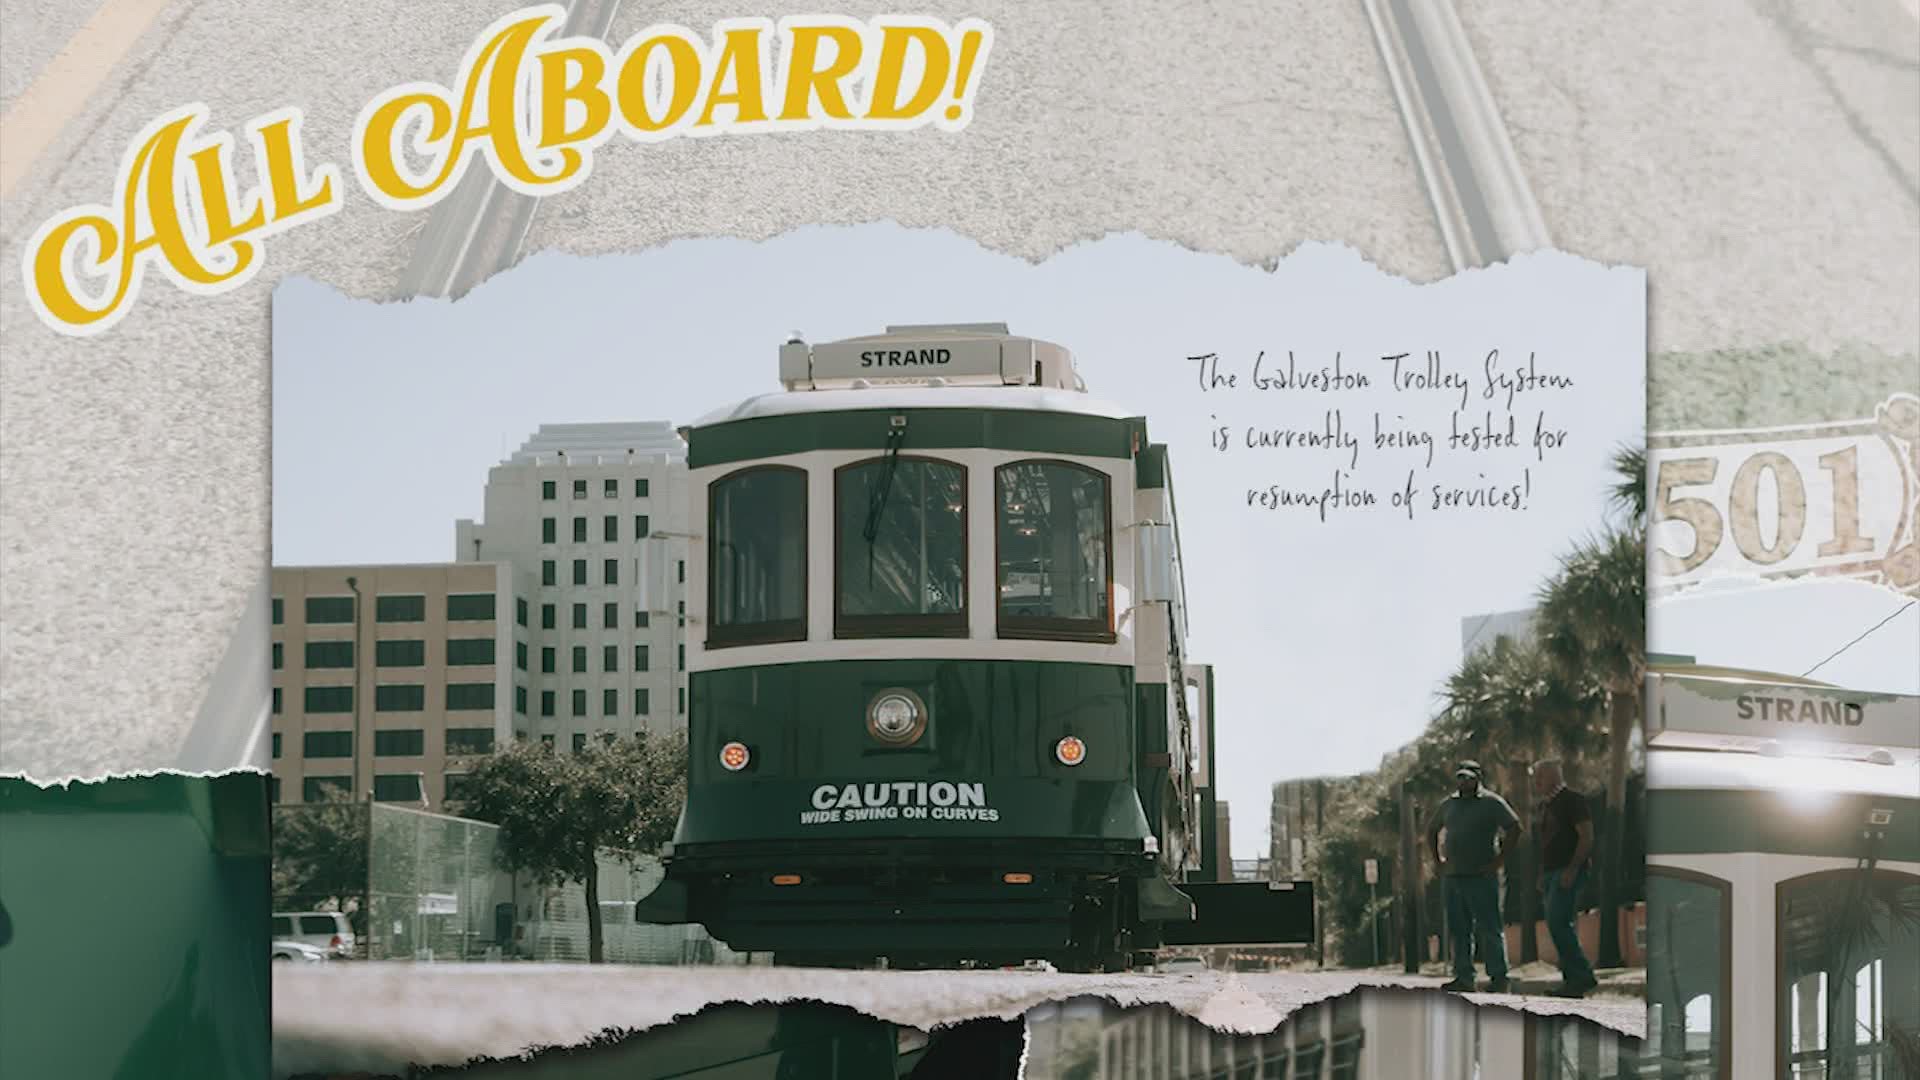 The City of Galveston announced Monday three of its four historic rail trolleys are undergoing testing and should be ready for passengers this summer.